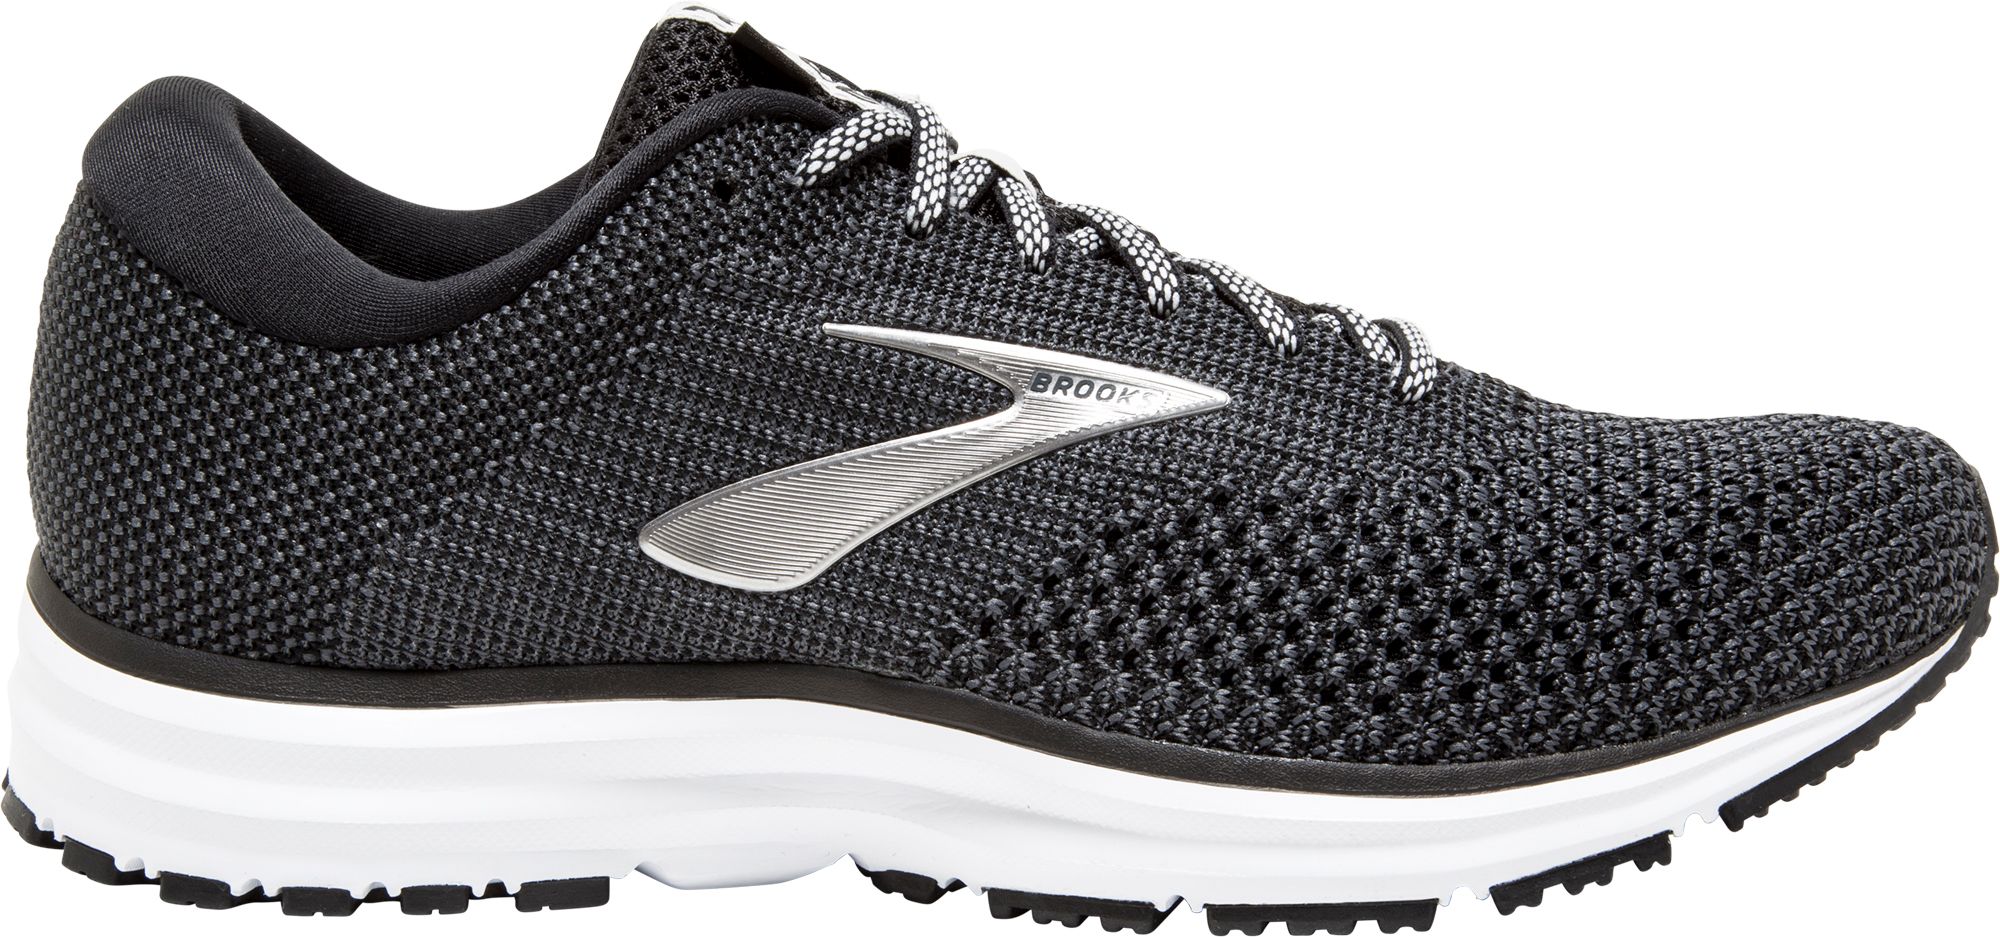 black and white brooks running shoes